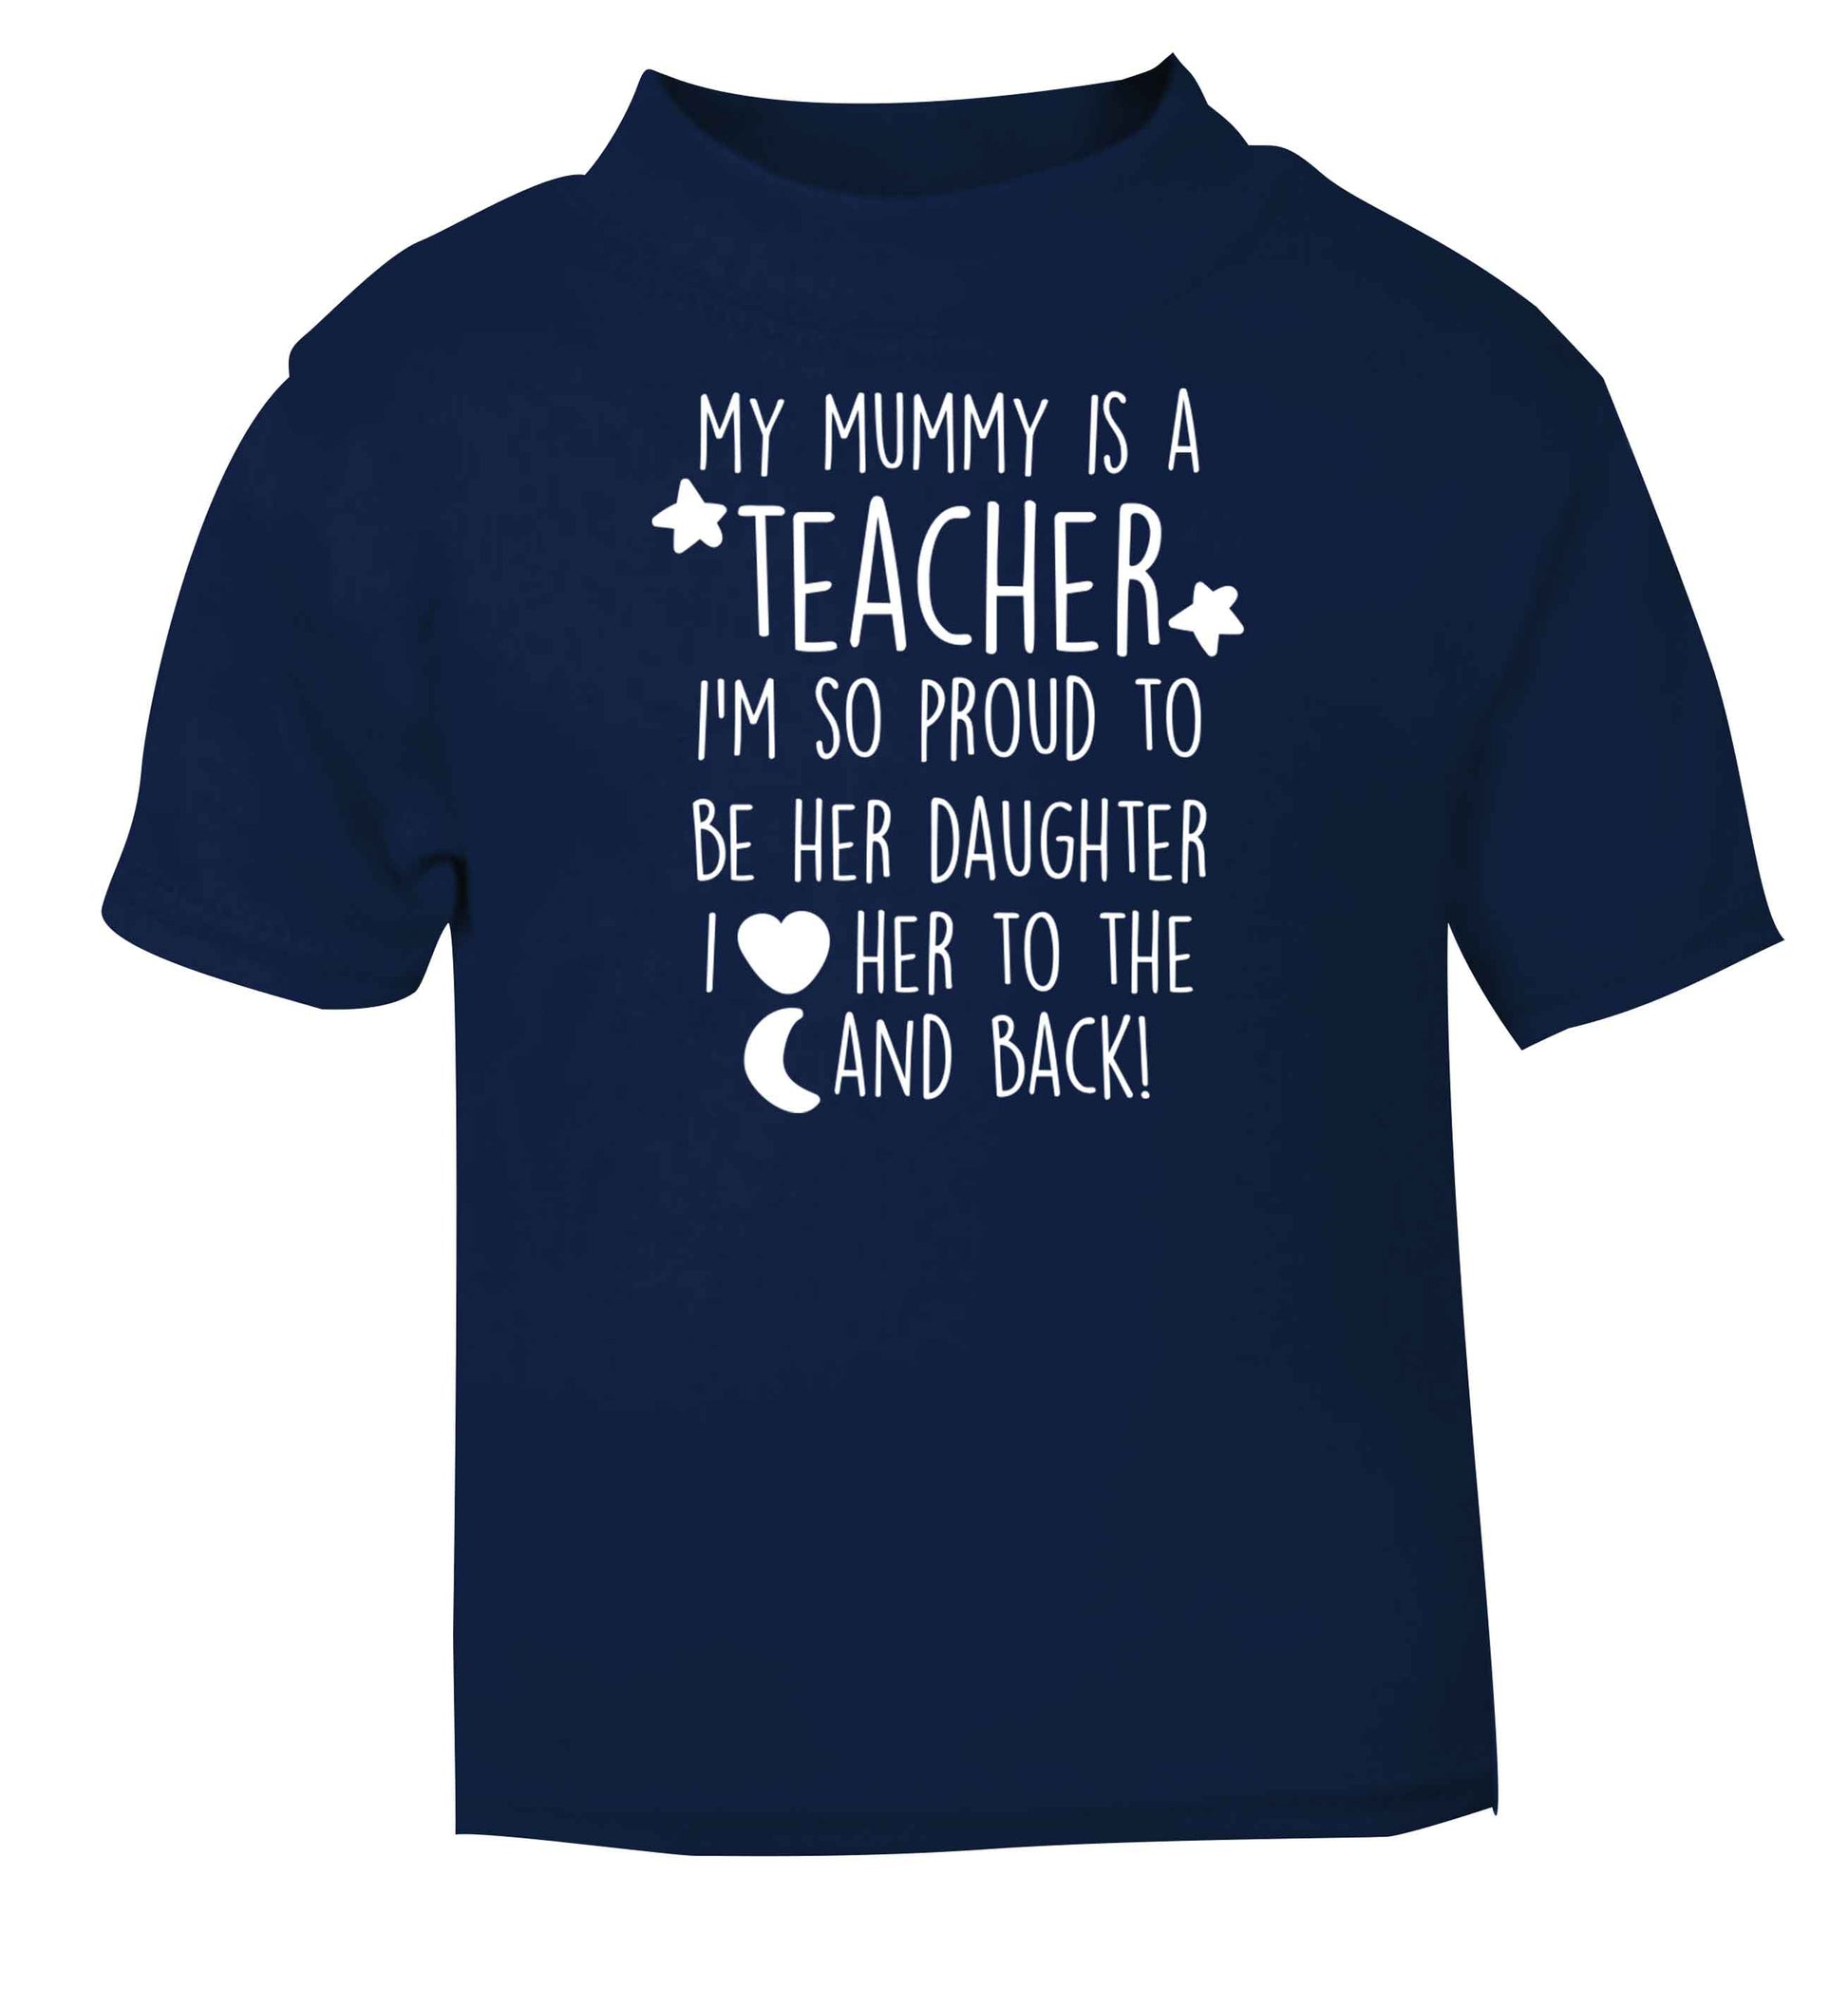 My mummy is a teacher I'm so proud to be her daughter I love her to the moon and back navy baby toddler Tshirt 2 Years